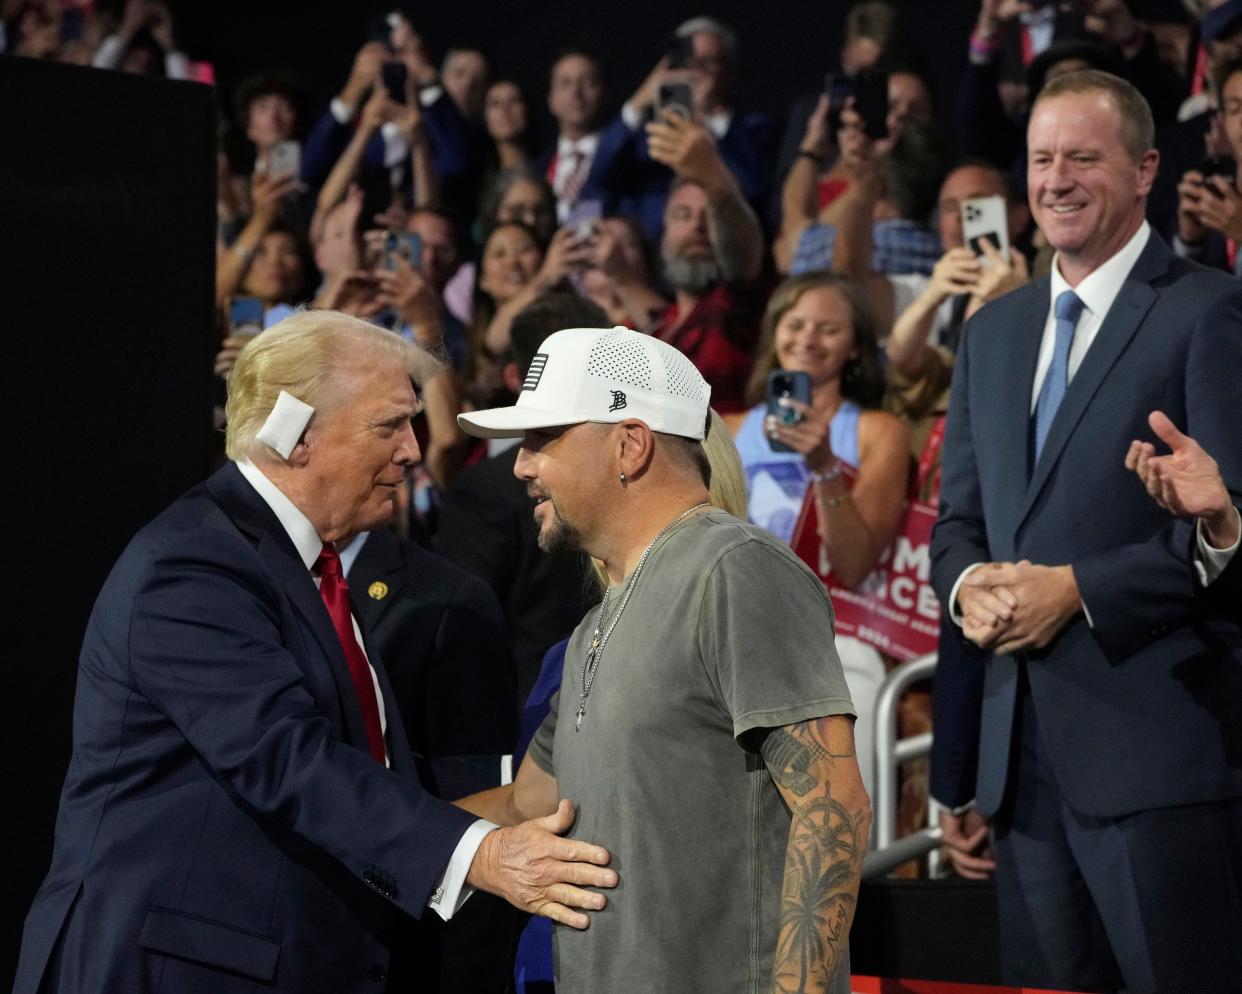 Republican presidential candidate Donald Trump with Jason Aldean on the final day of the Republican National Convention at the Fiserv Forum. On the final day of the RNC, Republican presidential candidate Donald Trump delivered a keynote speech.